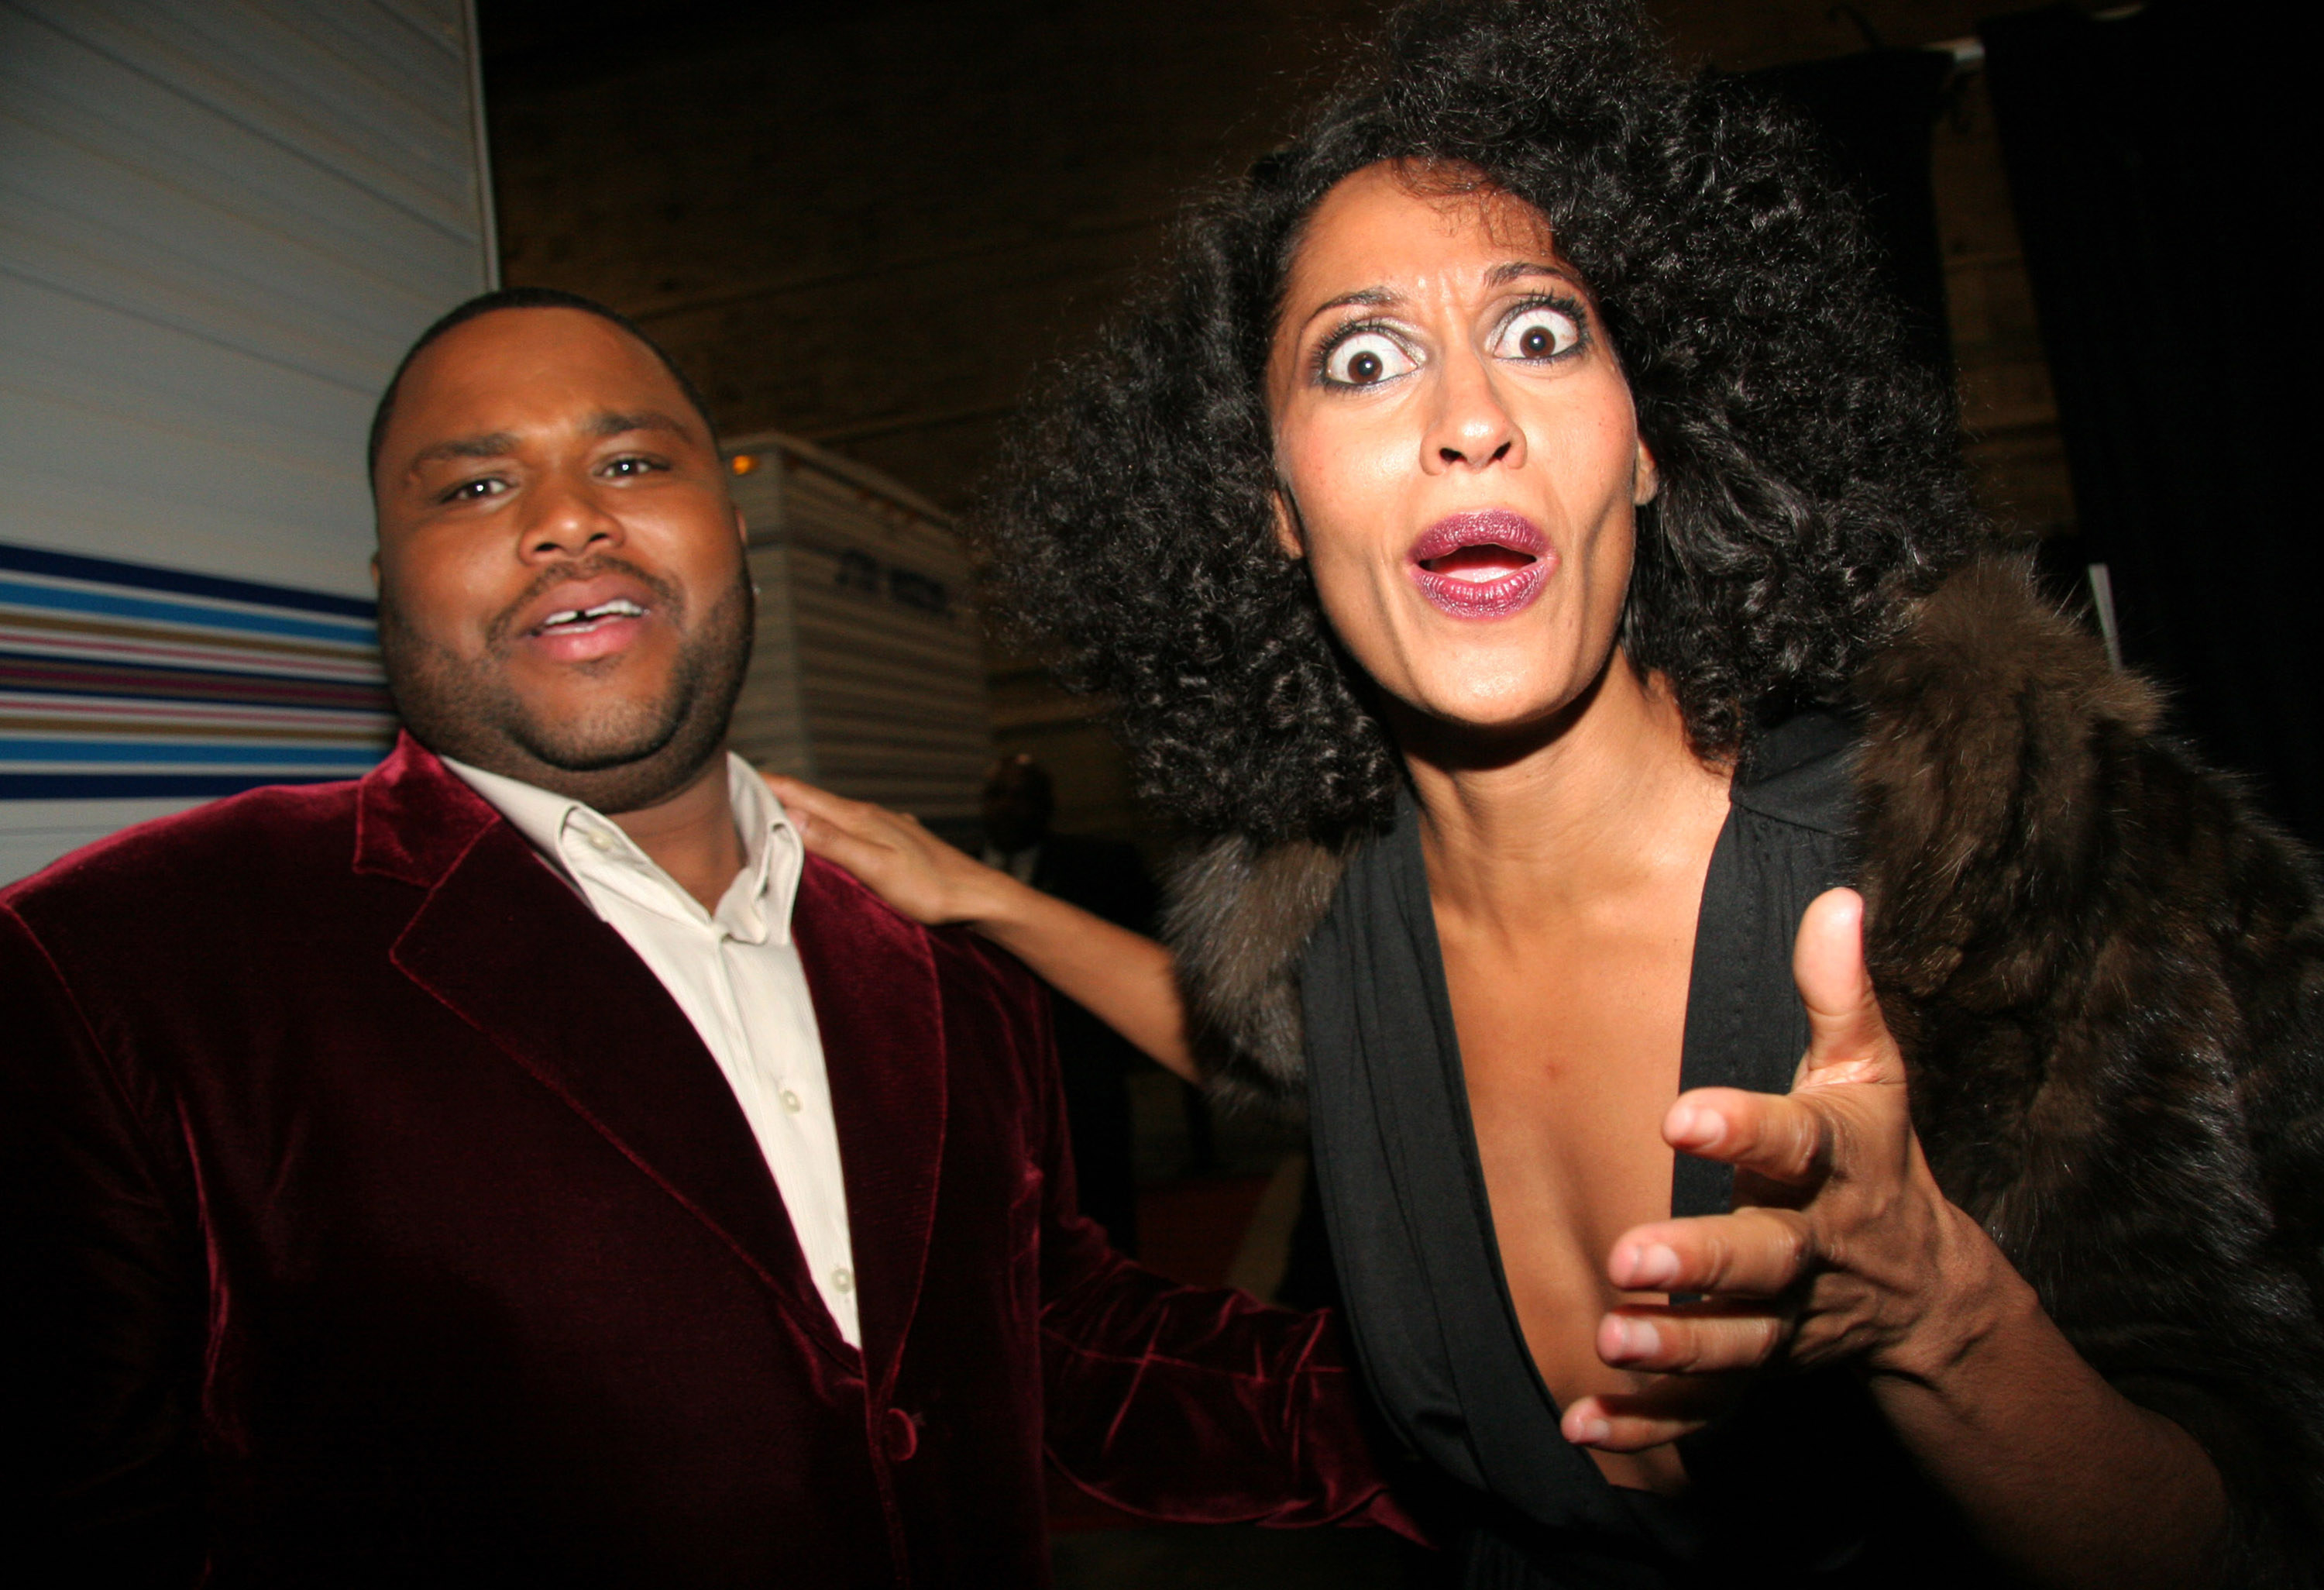 Tracee looks upset while posing with Anthony at the award show